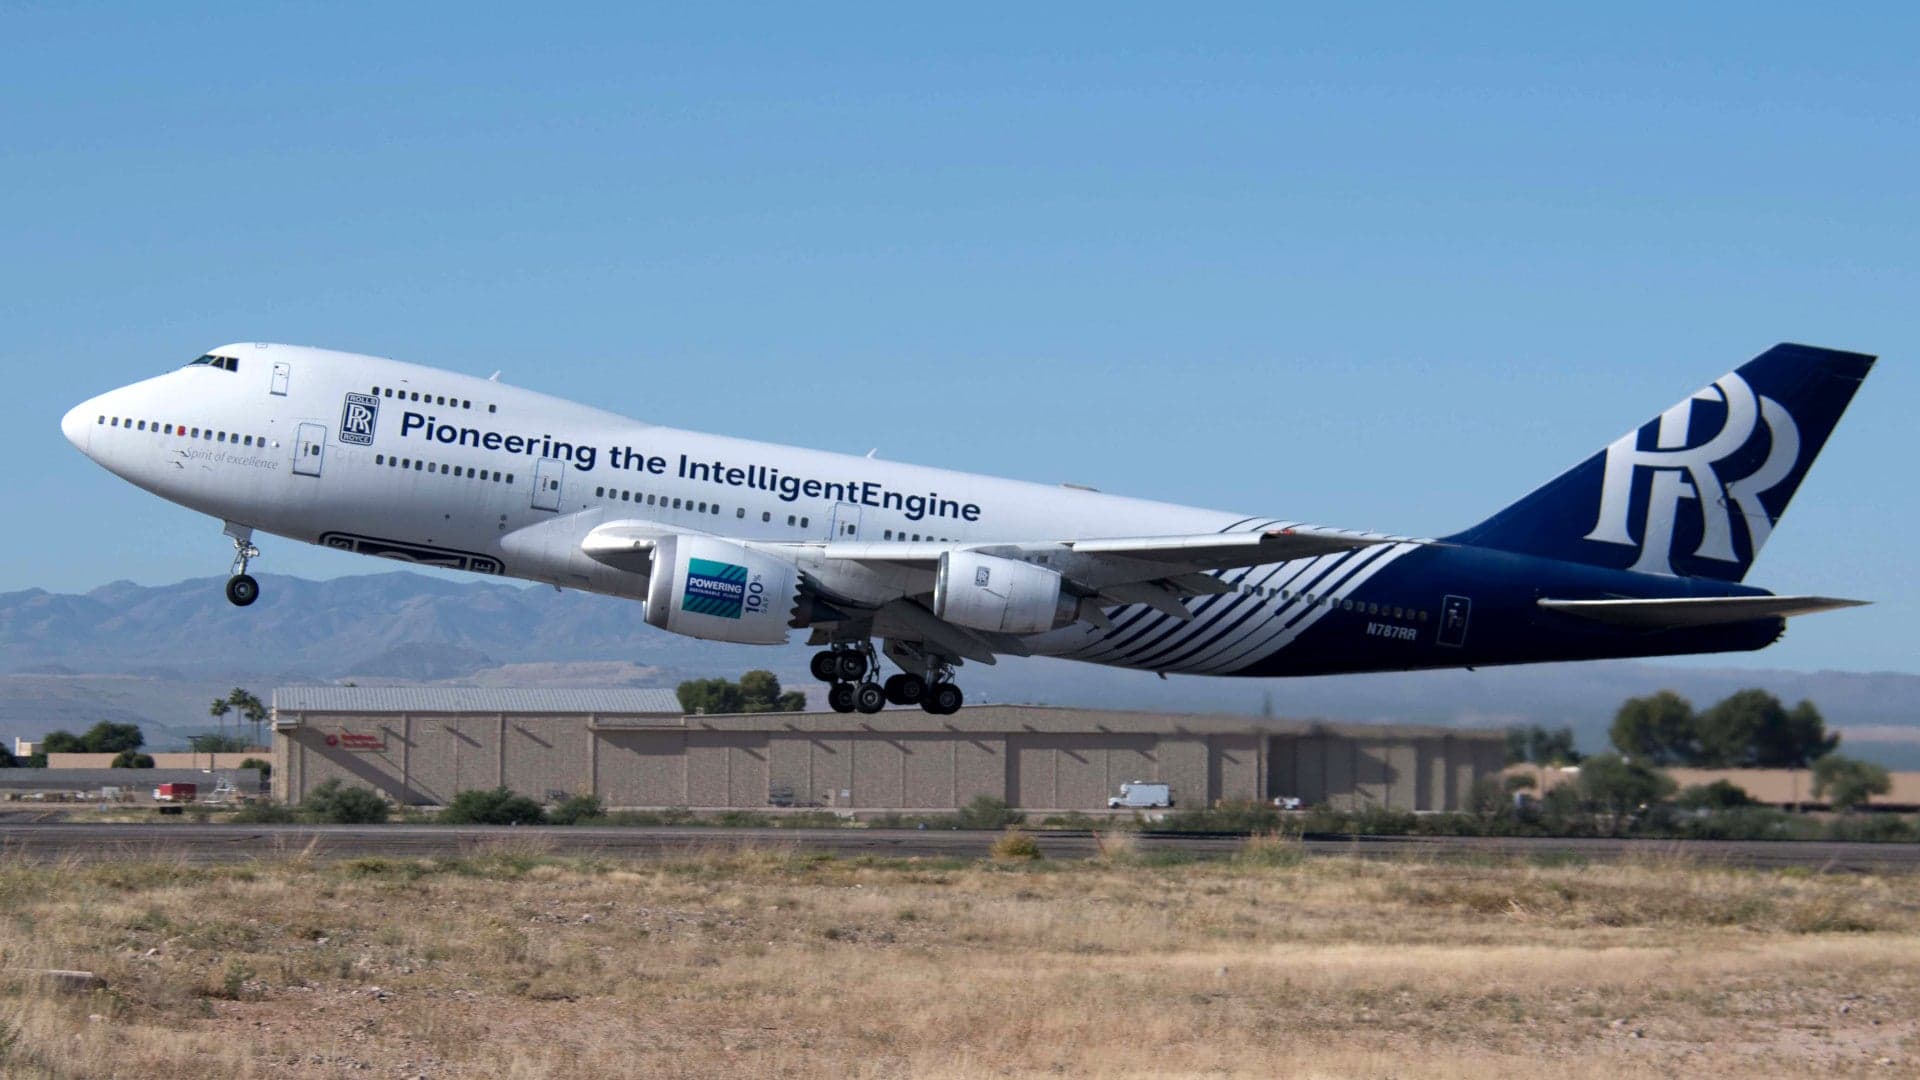 Rolls-Royce, Boeing Fly 747 With an Engine Using 100% Sustainable Fuel